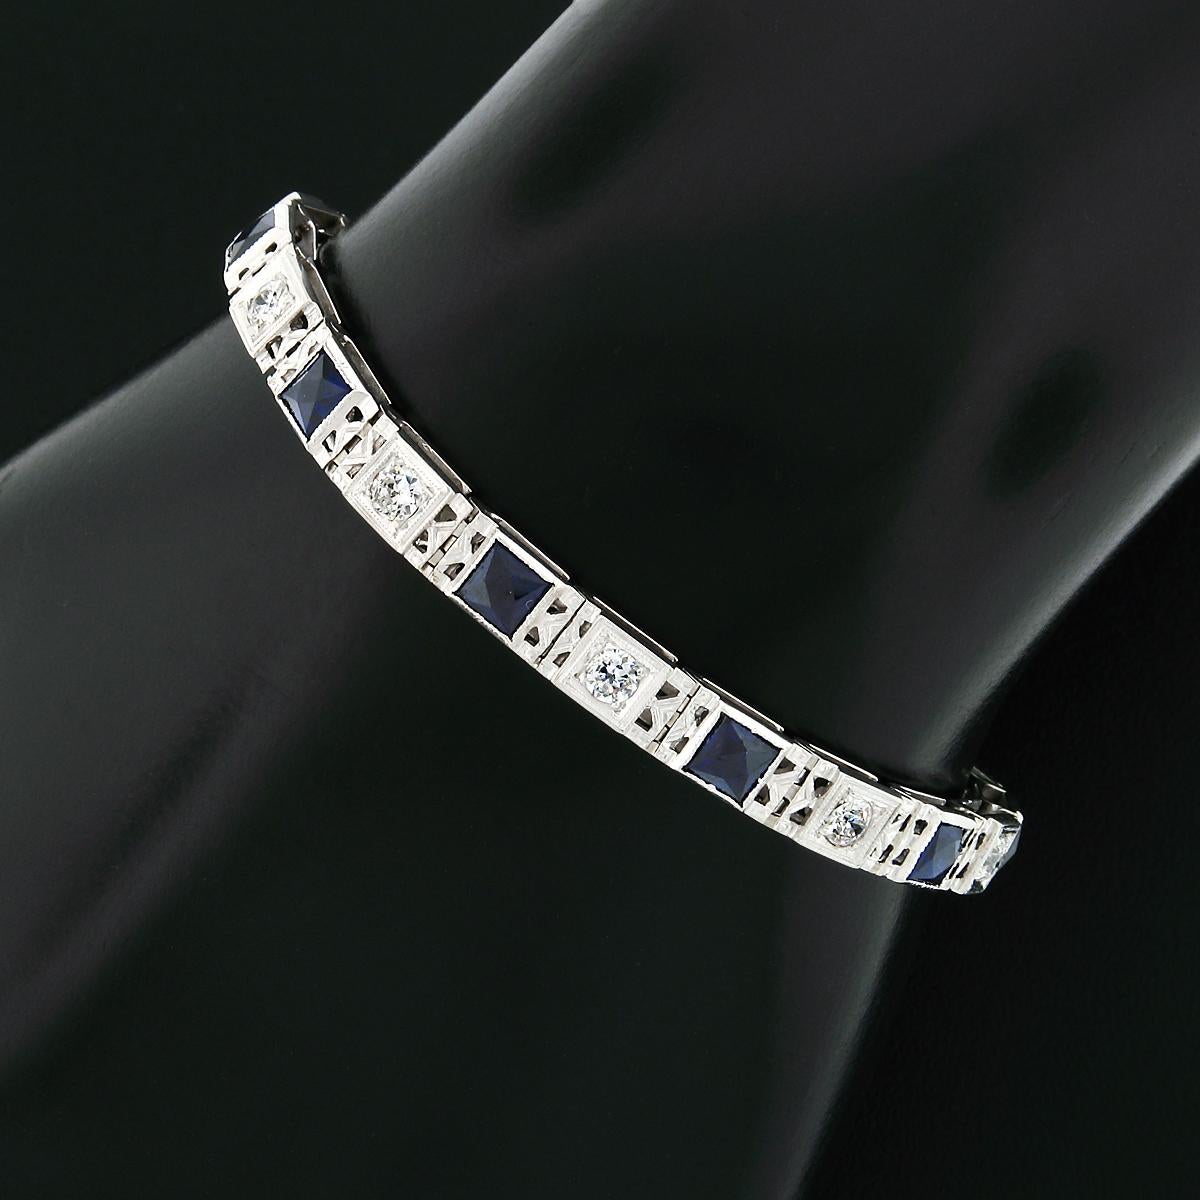 Here we have a gorgeous art deco period bracelet crafted from solid 18k white gold and features alternating diamonds and synthetic sapphires throughout the straight line design. The diamonds are old European cut stones totaling approximately 1.10